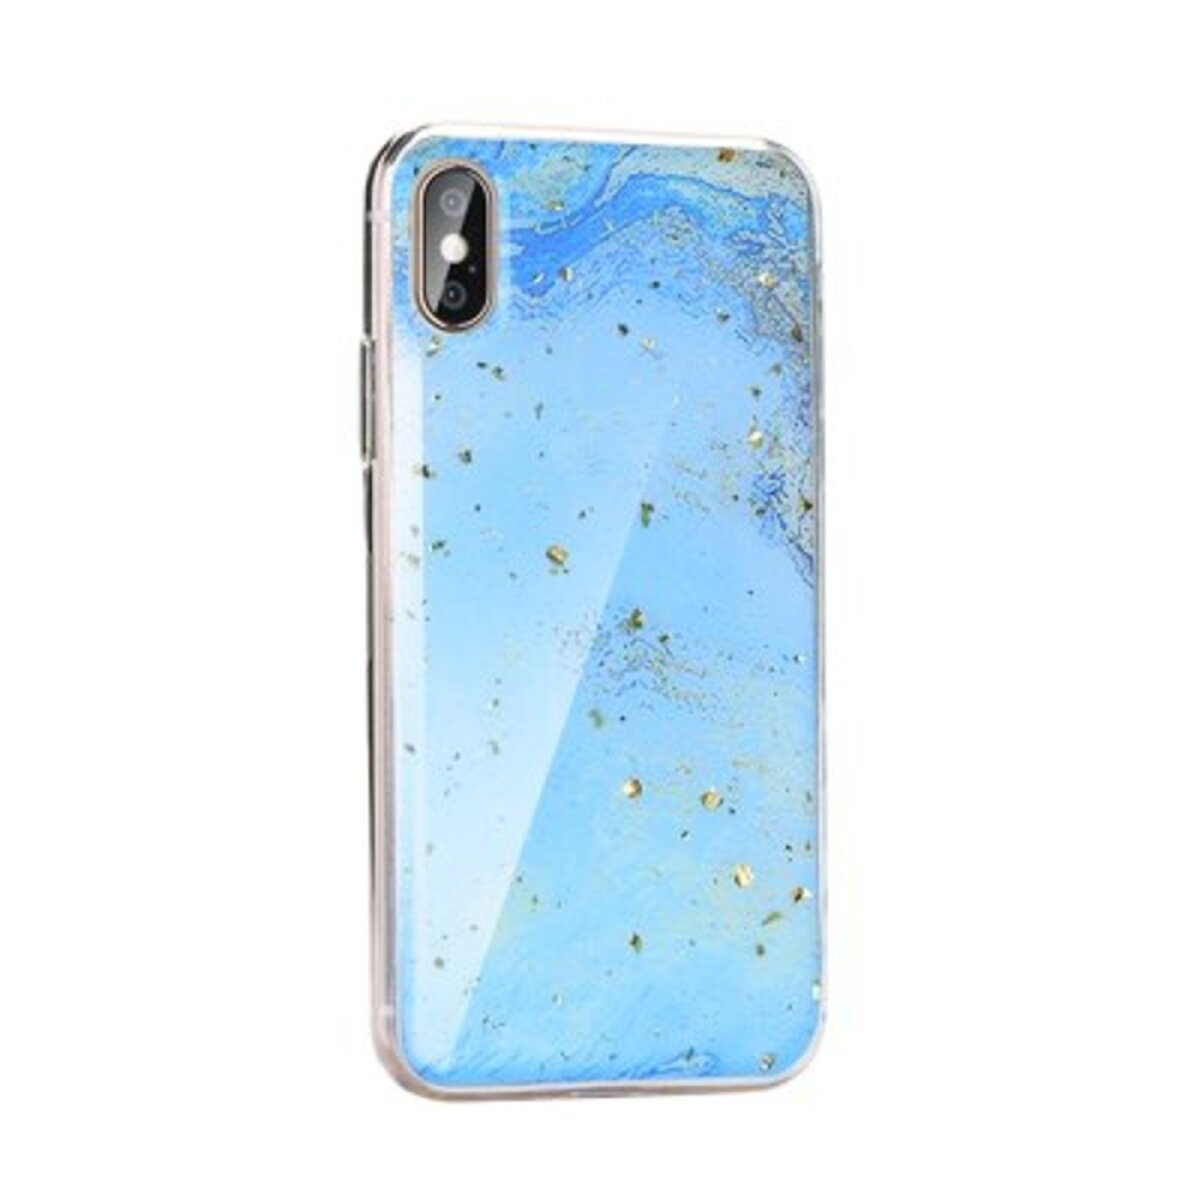 11 iPhone 11 iPhone FORCELL Case Apple, Not design Pro available 3, Pro, MARBLE Bookcover,